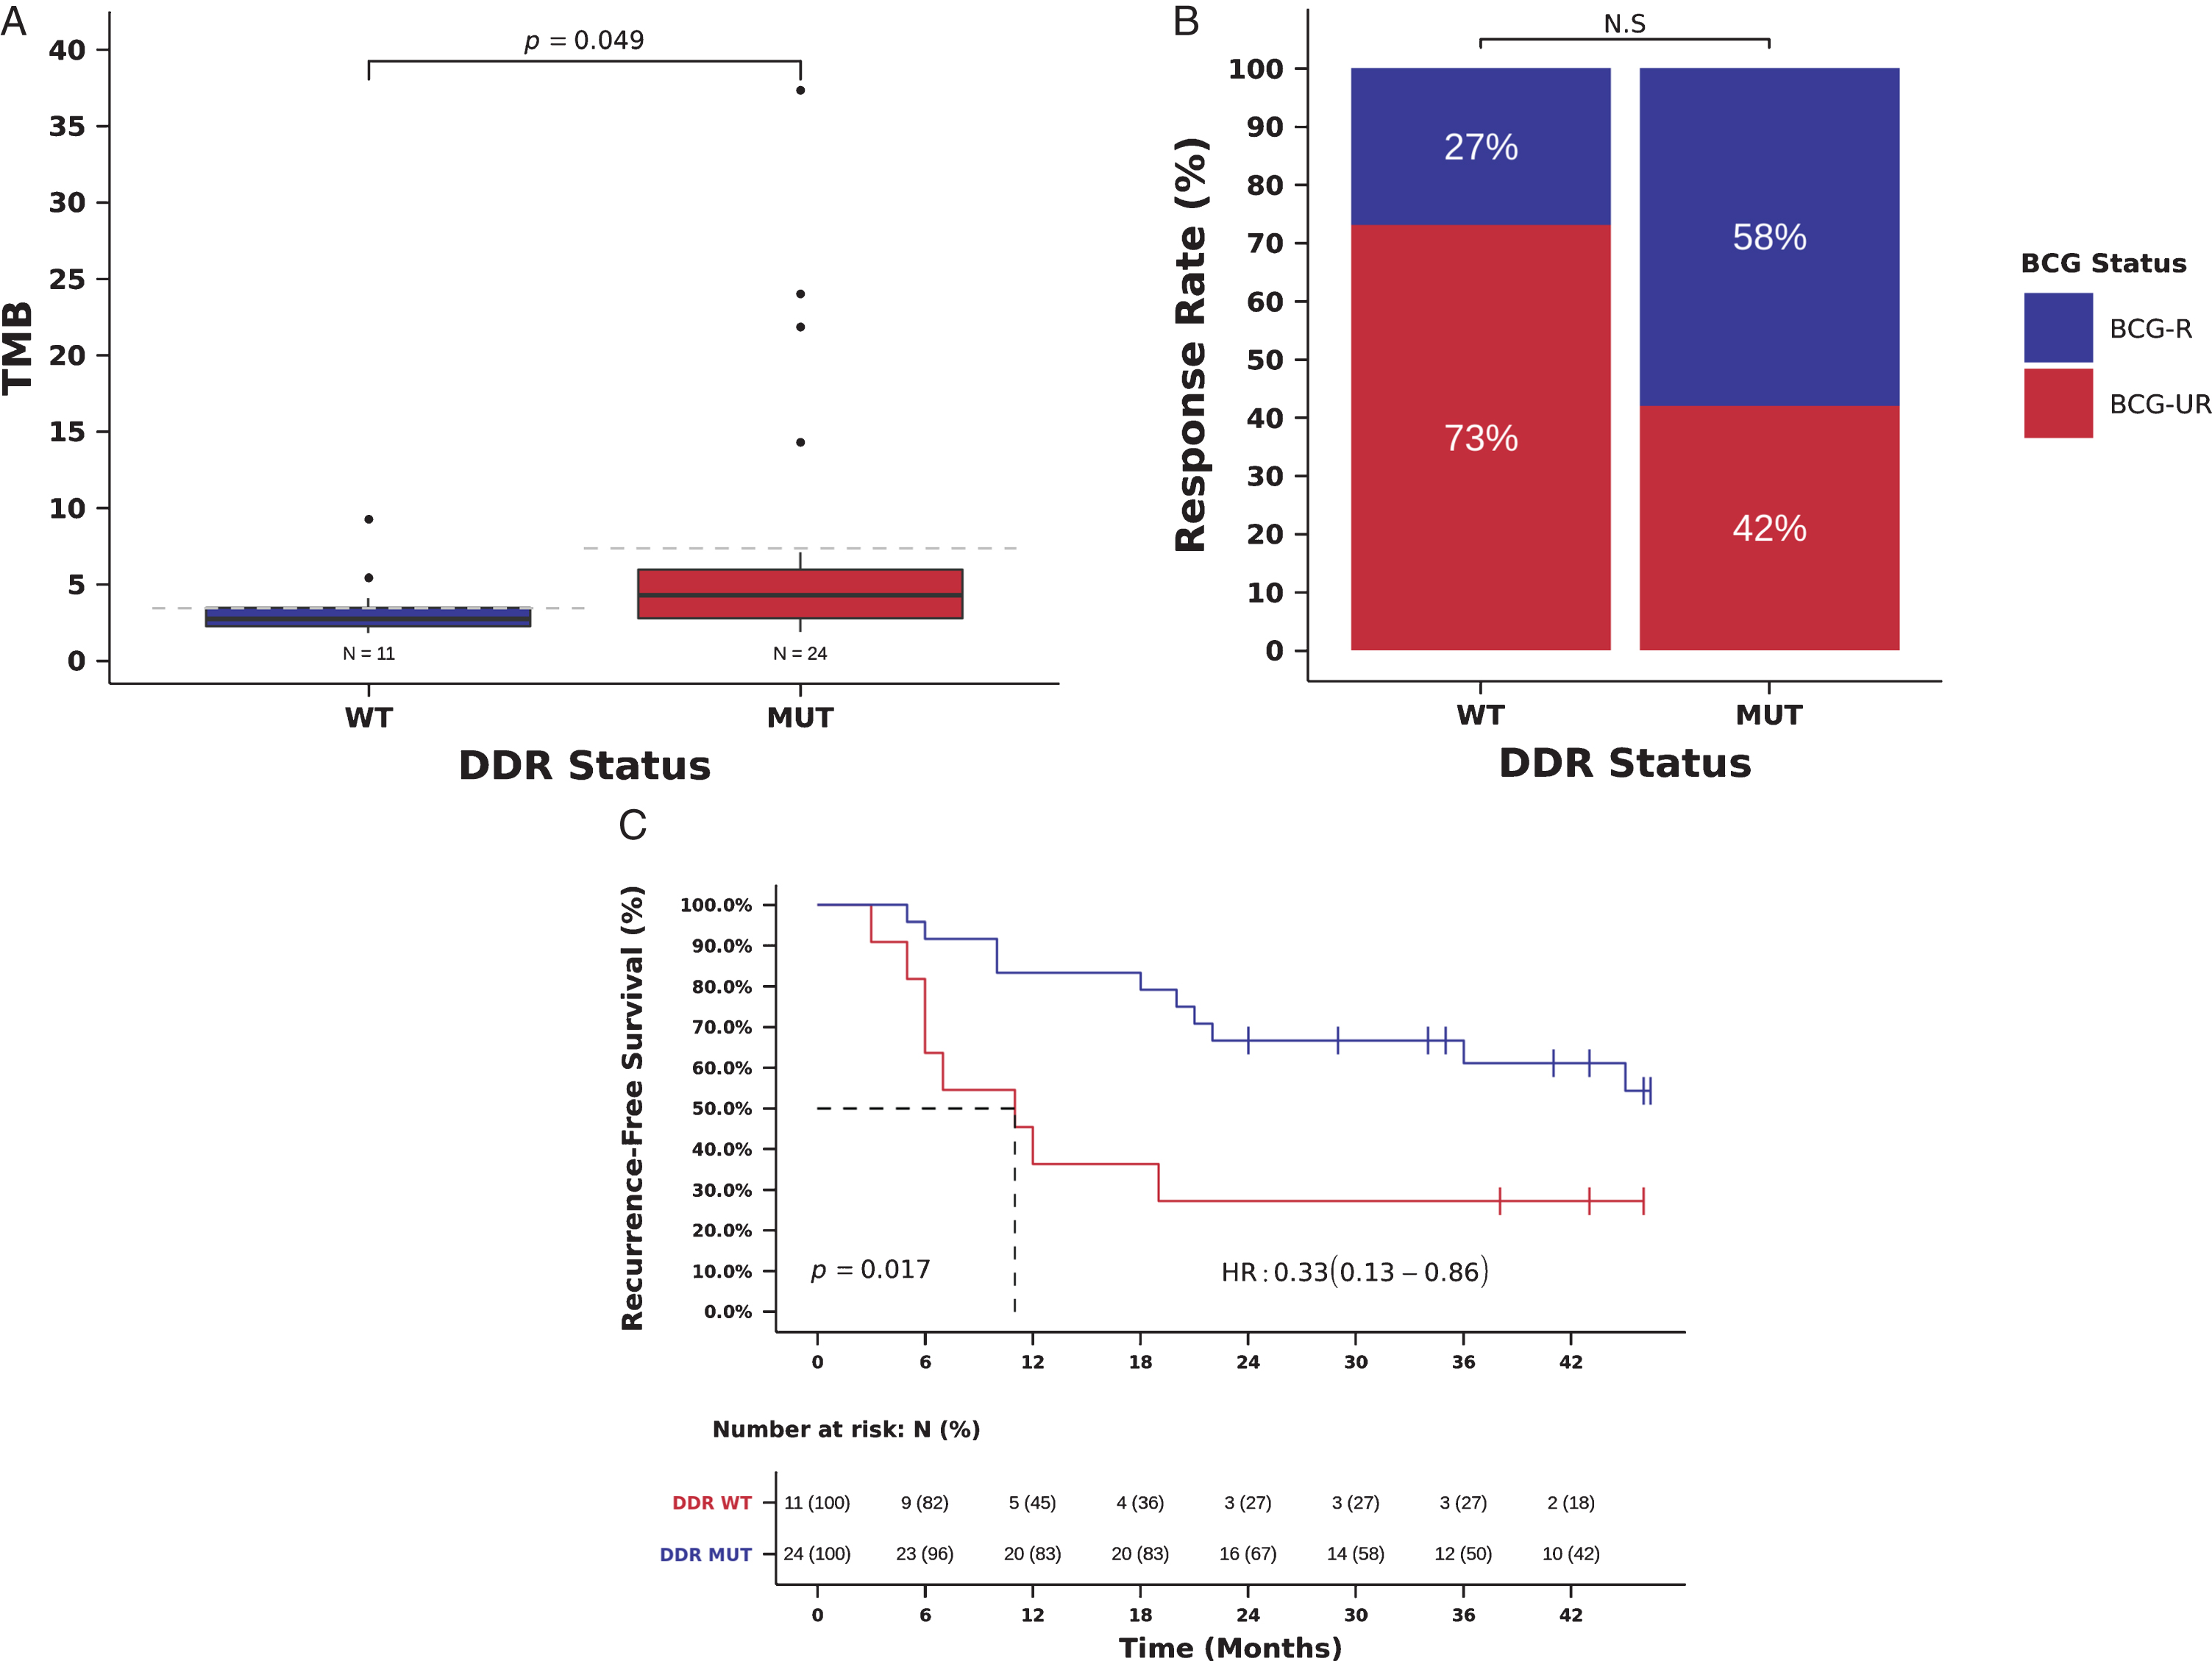 Mutations in DDR genes (193 gene list) and benefit from BCG immunotherapy. (A) TMB in tumors with deleterious mutations in DDR genes (DDR-MUT) compared to tumors with wild-type DDR genes (DDR-WT). (TMB DDR-MUT=4.3 vs. DDR-WT=2.7 mutations/Mb, Mann-Whitney P = 0.049). (B) BCG response rate in patients harboring tumors with deleterious mutations in DDR genes (DDR-MUT) compared to tumors with wild-type DDR genes (DDR-WT). (RR DDR-MUT=58% vs. DDR-WT=27%, OR = 3.73, 95%, CI: 0.79-17.68, Pearson Chi-Square P = 0.088) (C) Kaplan-Meier curve for recurrence-free survival after BCG immunotherapy for patients harboring tumors with deleterious mutations in DDR genes (DDR-MUT) compared to tumors with wild-type DDR genes (DDR-WT). (RFS DDR-MUT=35.5 vs. DDR-WT=11.0 months, HR = 0.33, 95% CI: 0.13-0.86, Log-rank P = 0.017).